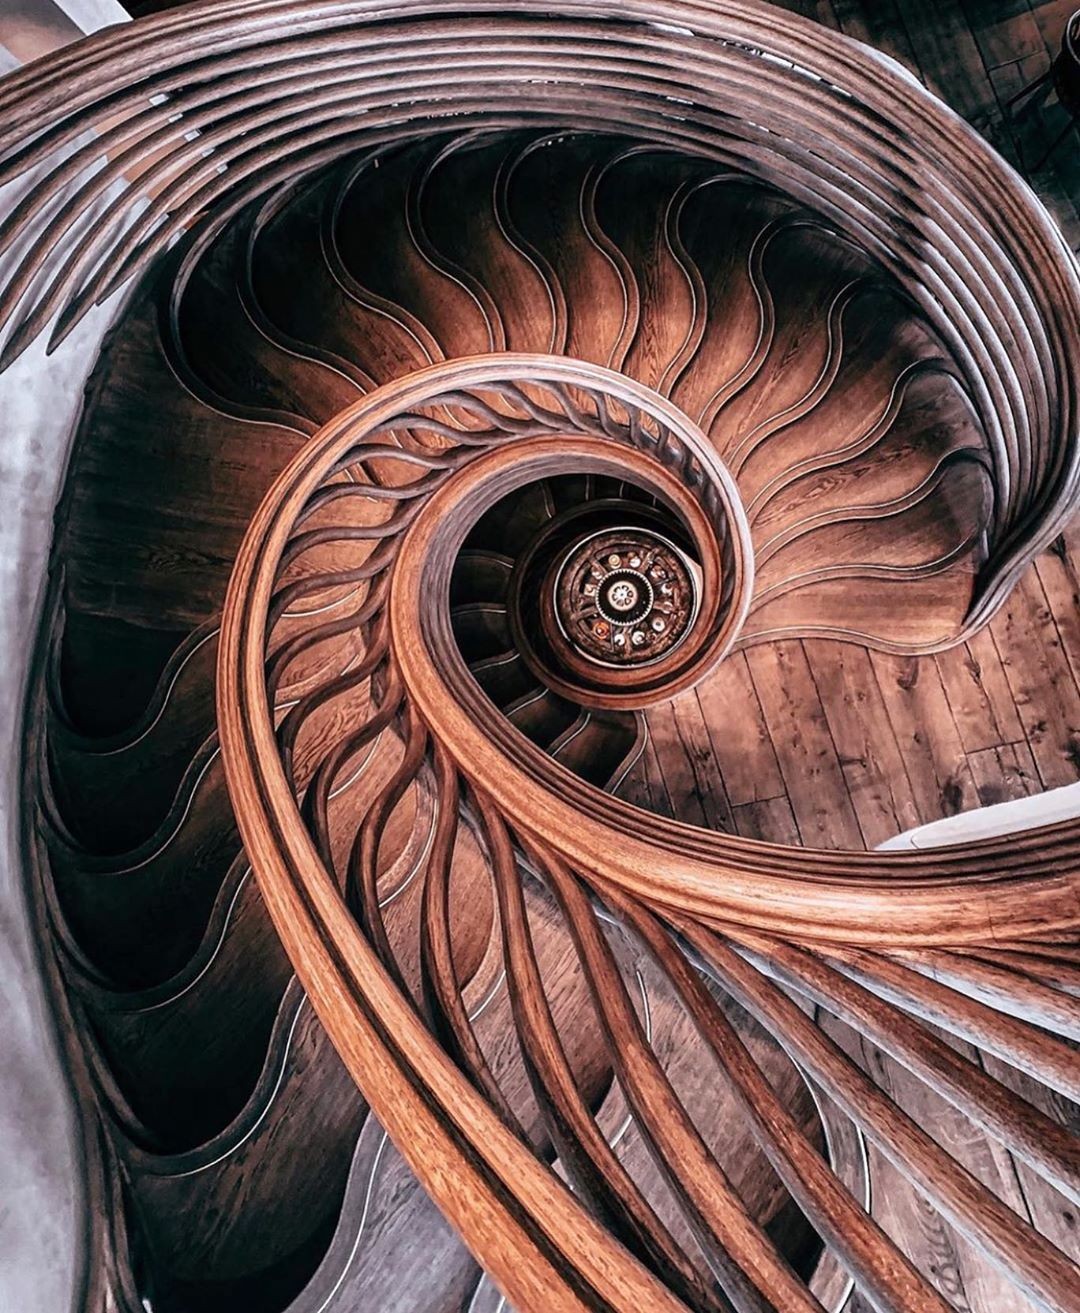 A grand circular staircase greets visitors to Hide – the London restaurant with Europe’s largest wine list. Photo: Handout